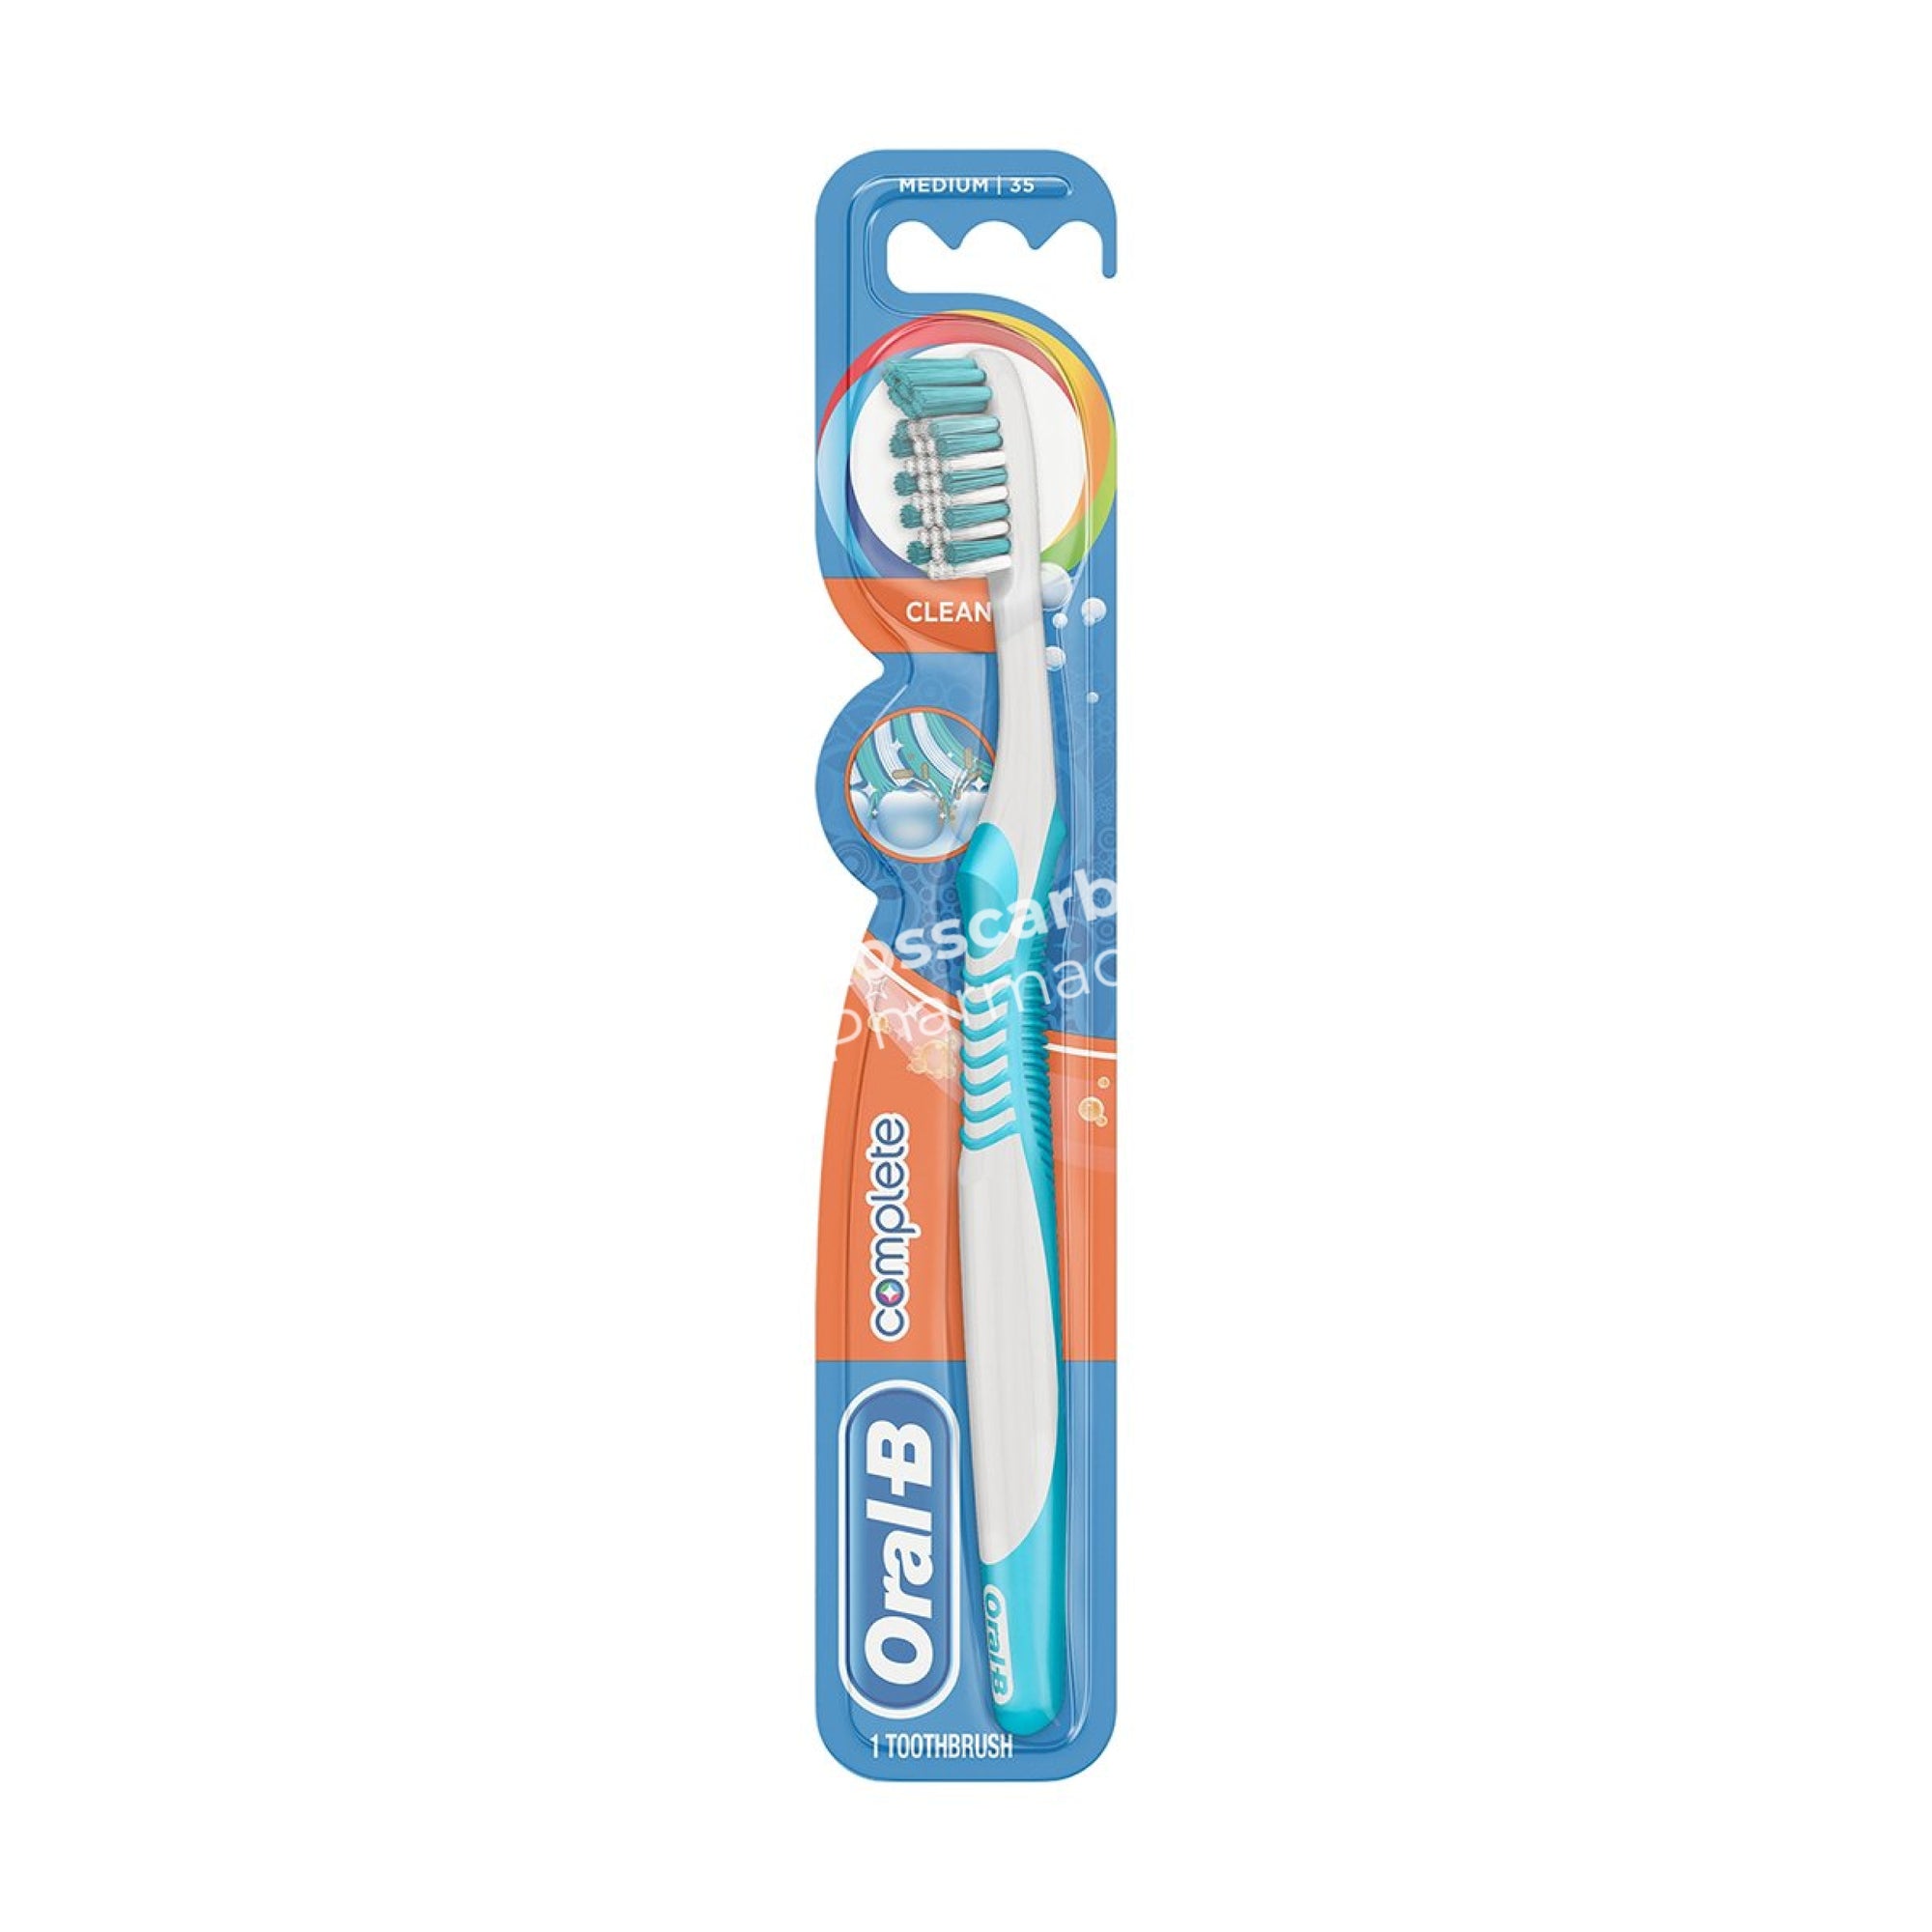 Oral-B Complete Clean Medium 35 Toothbrush Toothbrushes